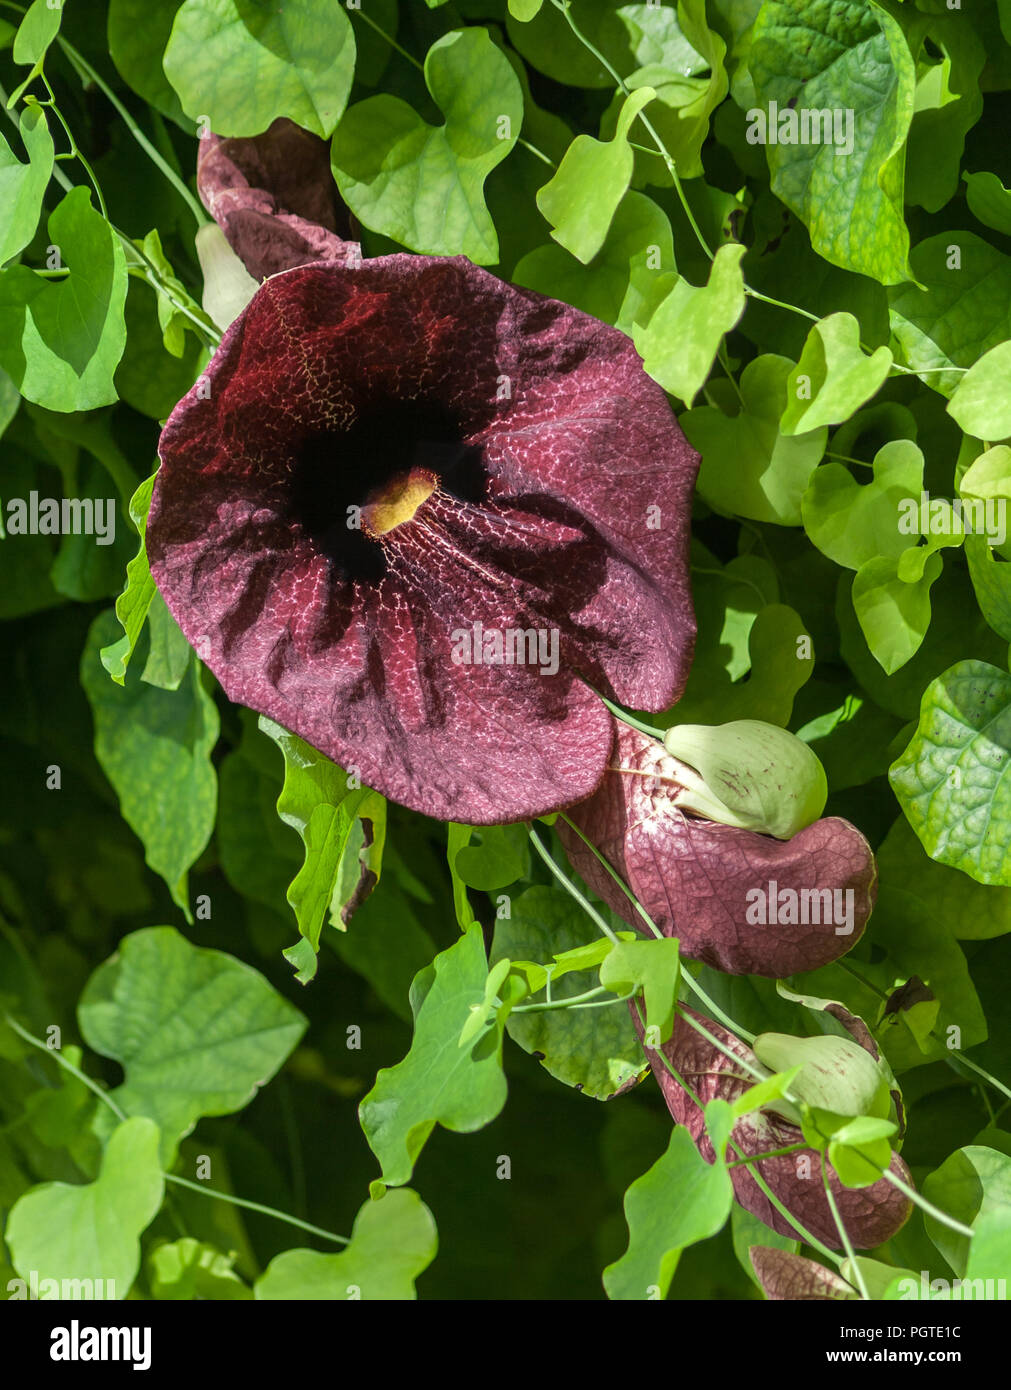 aristolochia macrophylla, shrubby liana in a garden lit by sunlight, one large flower and several small, green leaves Stock Photo